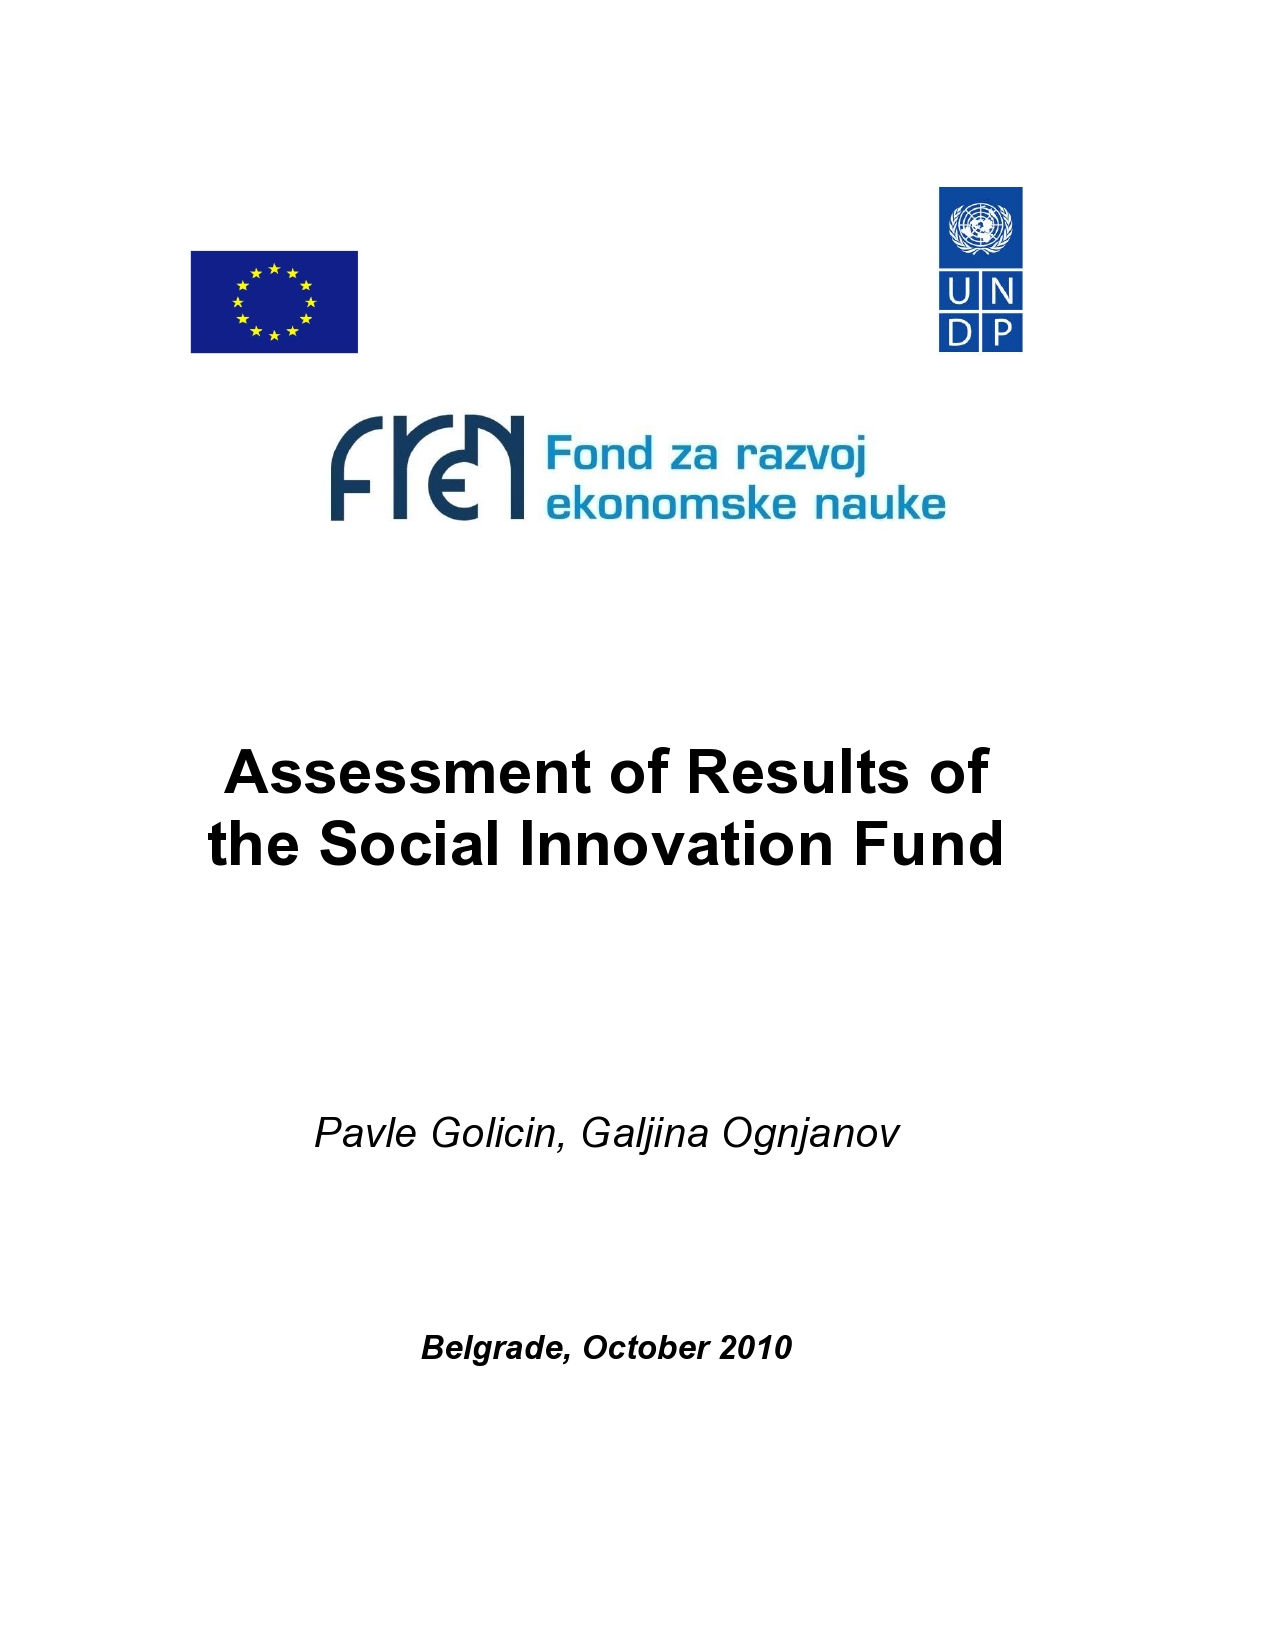 Assessment of Results of the Social Innovation Fund